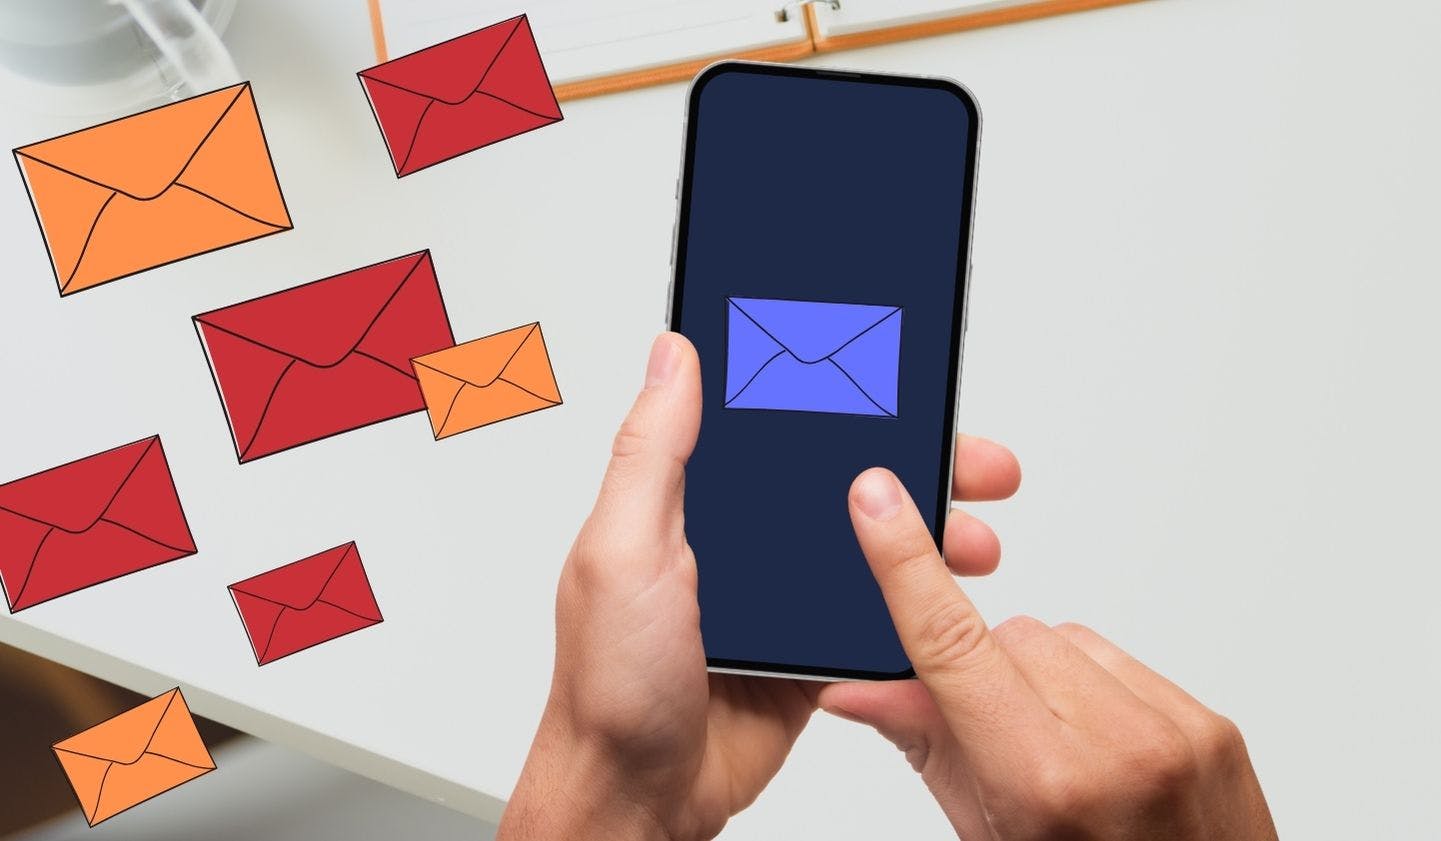 Blog Post Image of hands holding a phone displaying an illustration of a StartMail email envelope that is safe. Next to the phone are floating spam emails in red and orange.